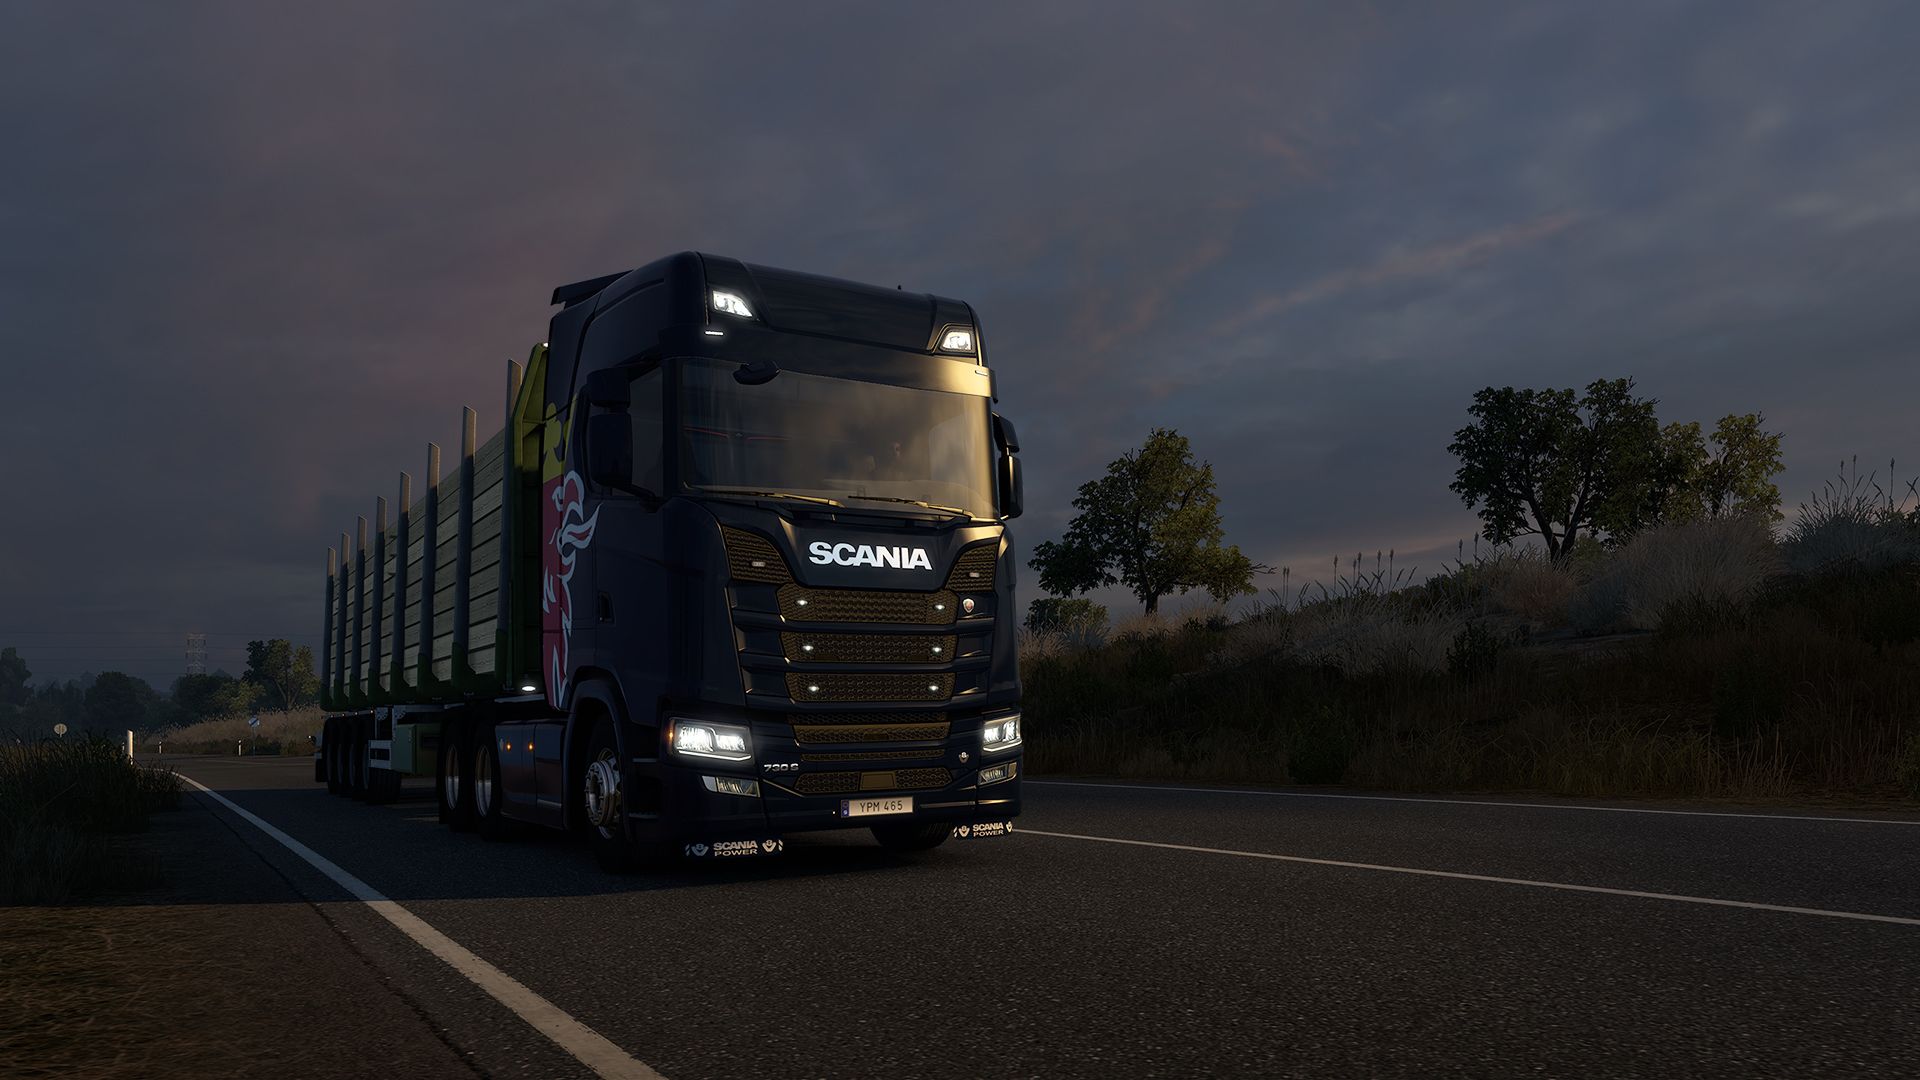 Euro Truck Simulator 2 Update 1.49 Patch Notes: Used truck dealers arrive